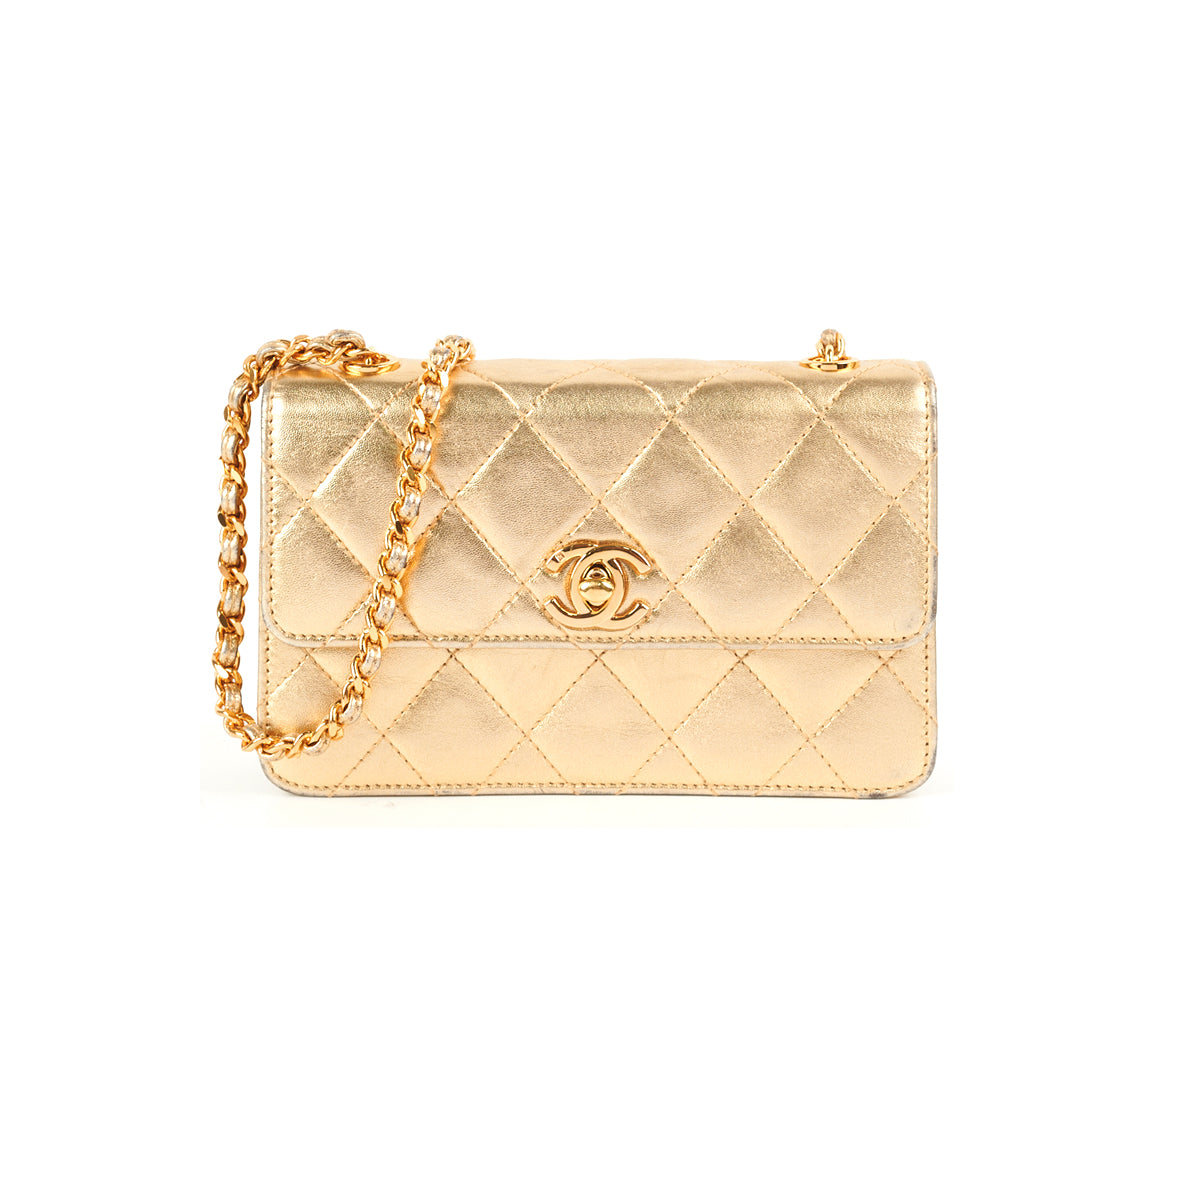 Chanel Vintage Gold Quilted Lambskin Mini Flap Bag was 4288  Vault 55